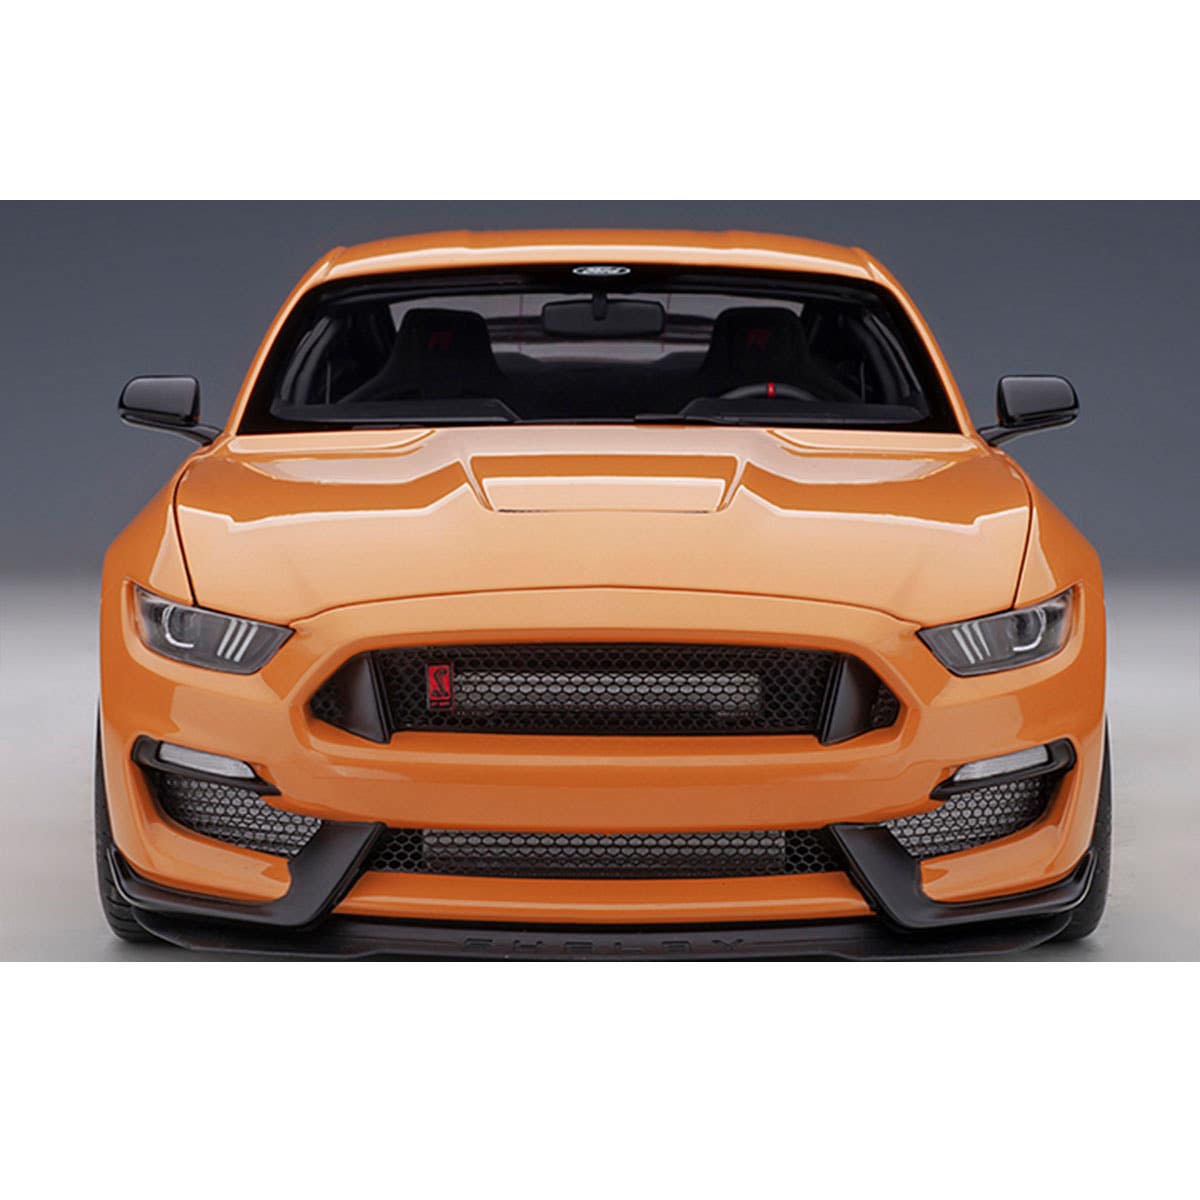 FORD SHELBY GT-350R  (FURY ORANGE) - 1:18 Scale Composite Model Car